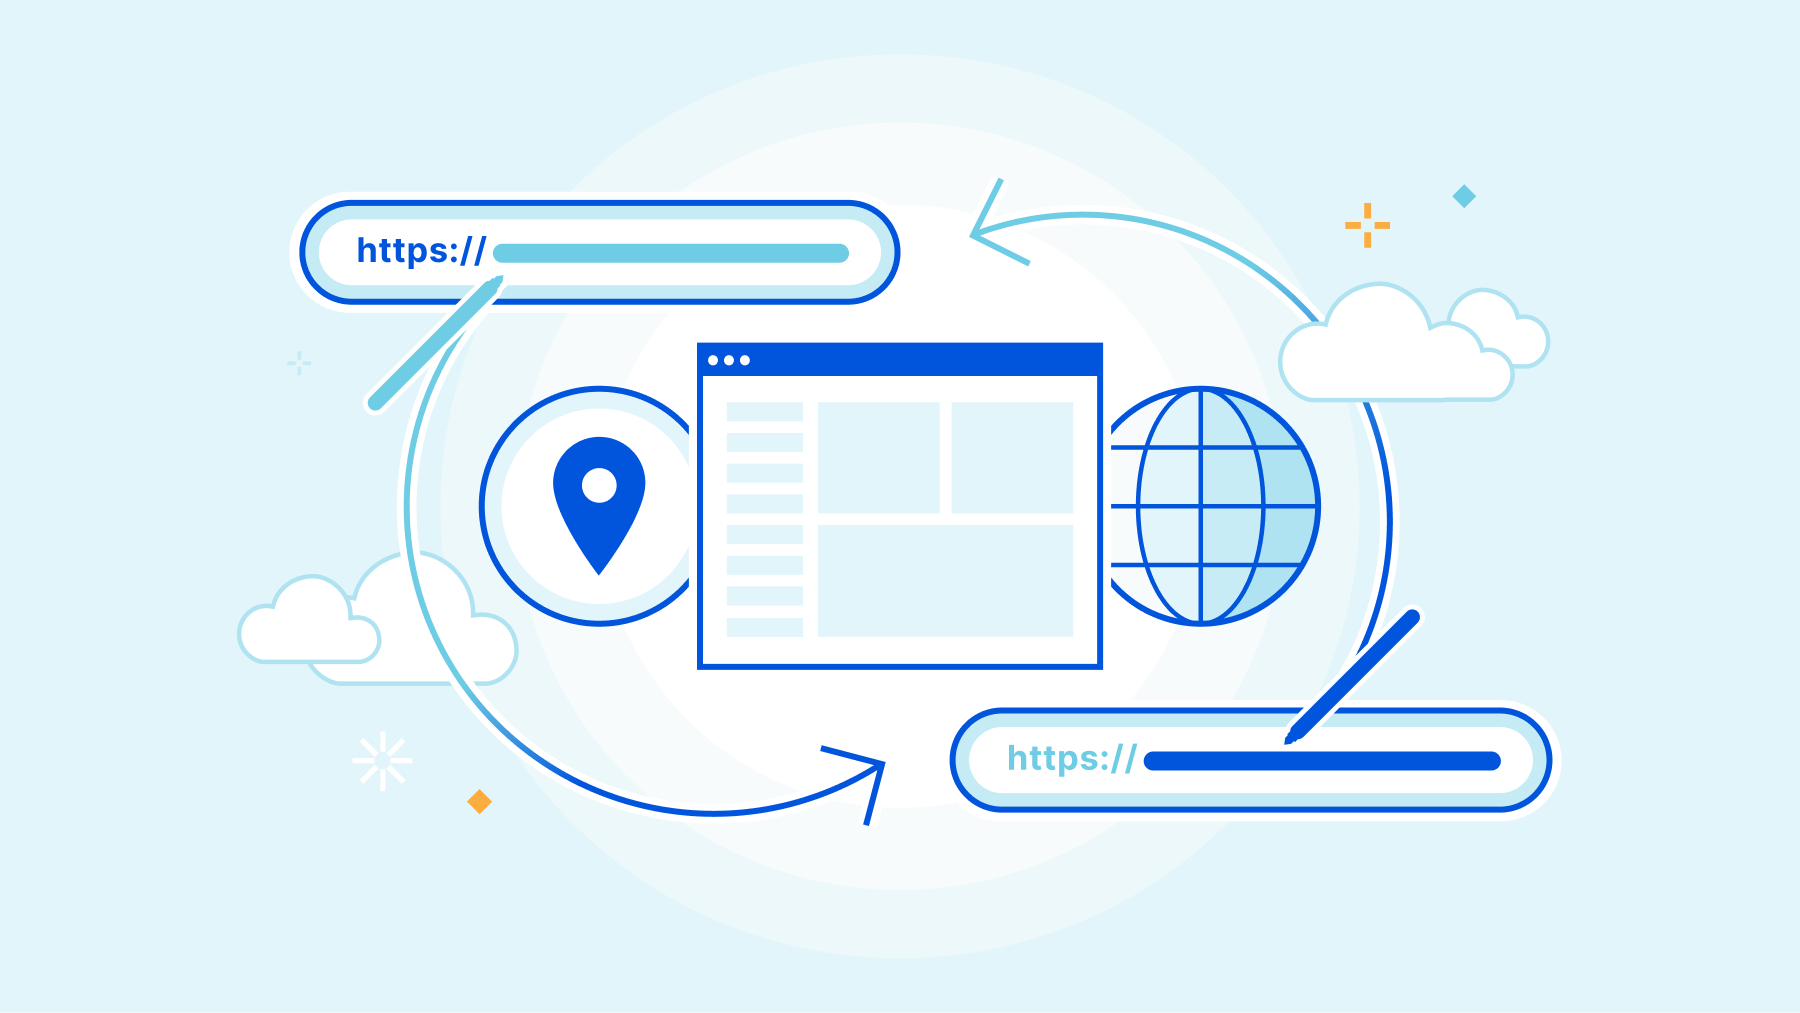 Dynamic URL redirects: 301 to the future